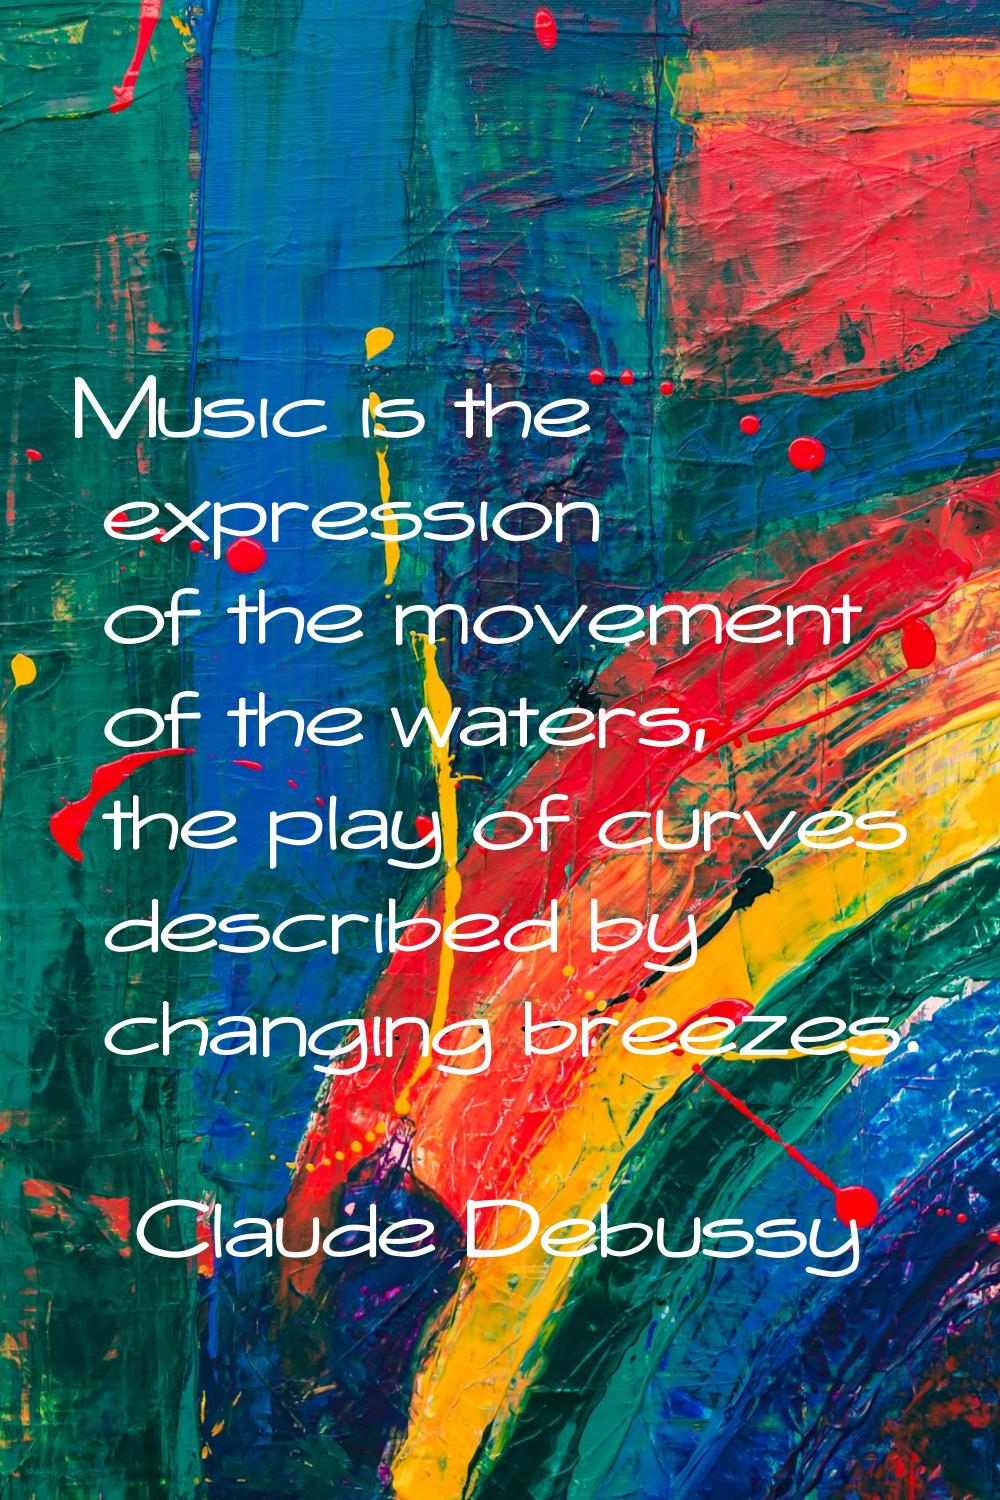 Music is the expression of the movement of the waters, the play of curves described by changing bre